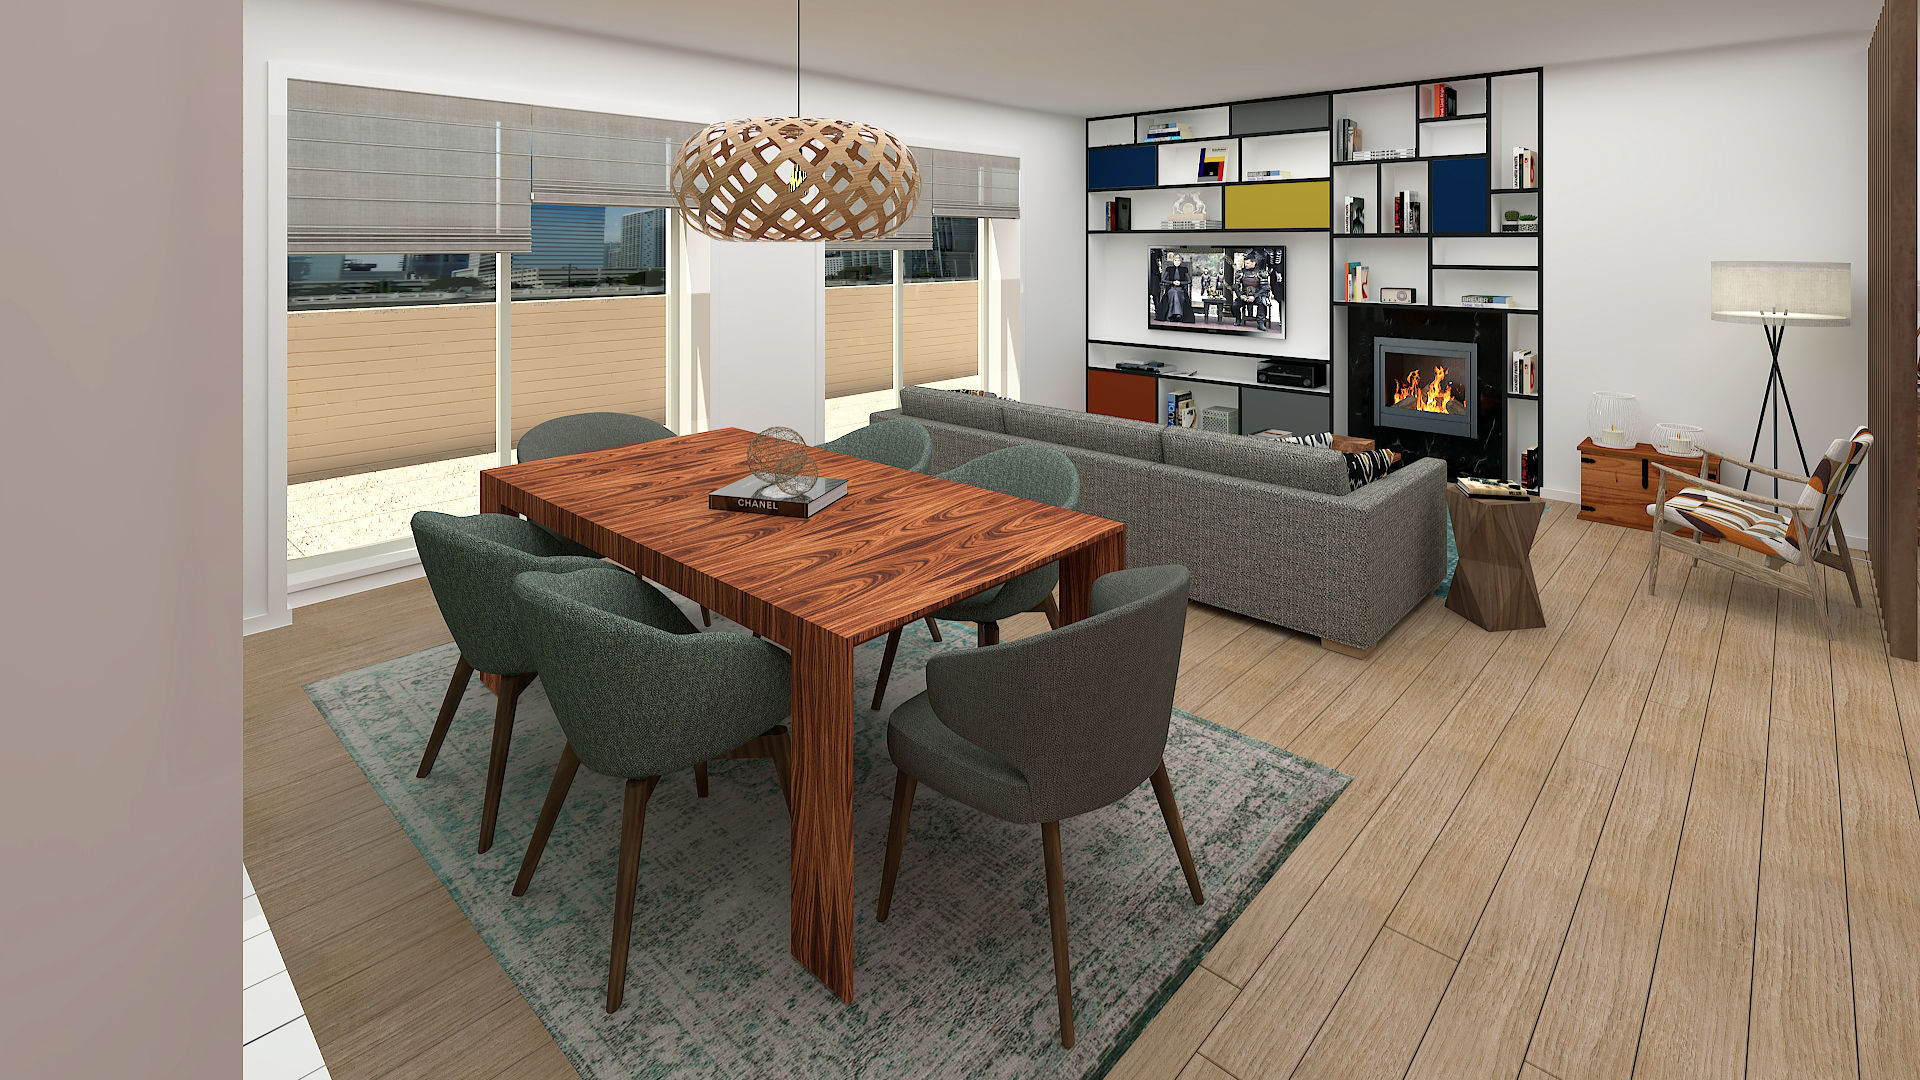 Dining room No Place Like Home ® Comedores modernos dining room,living room,fireplace,ironwood,built-in-bookcase